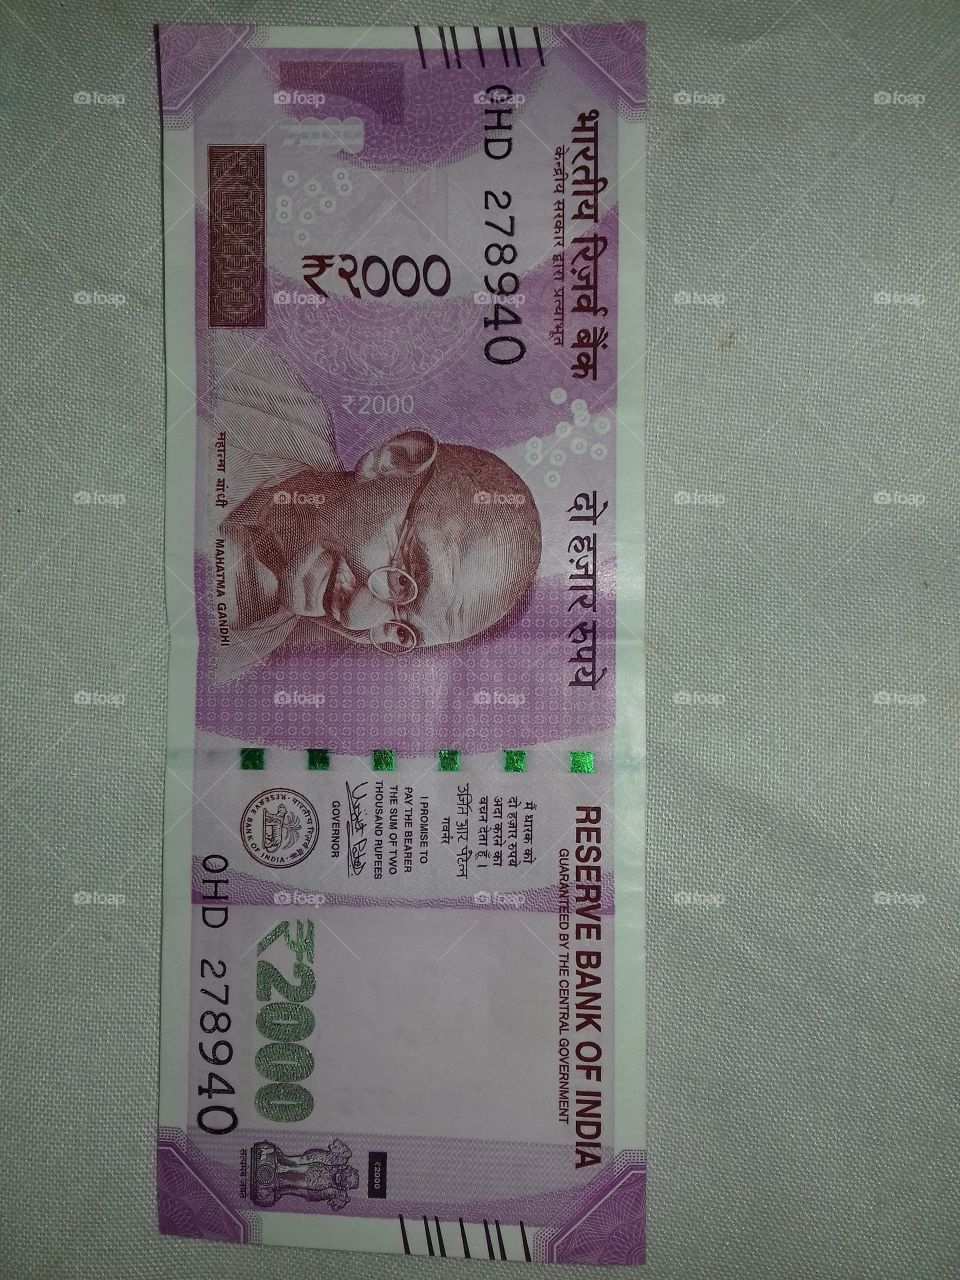 Inadian new note rupees 2000